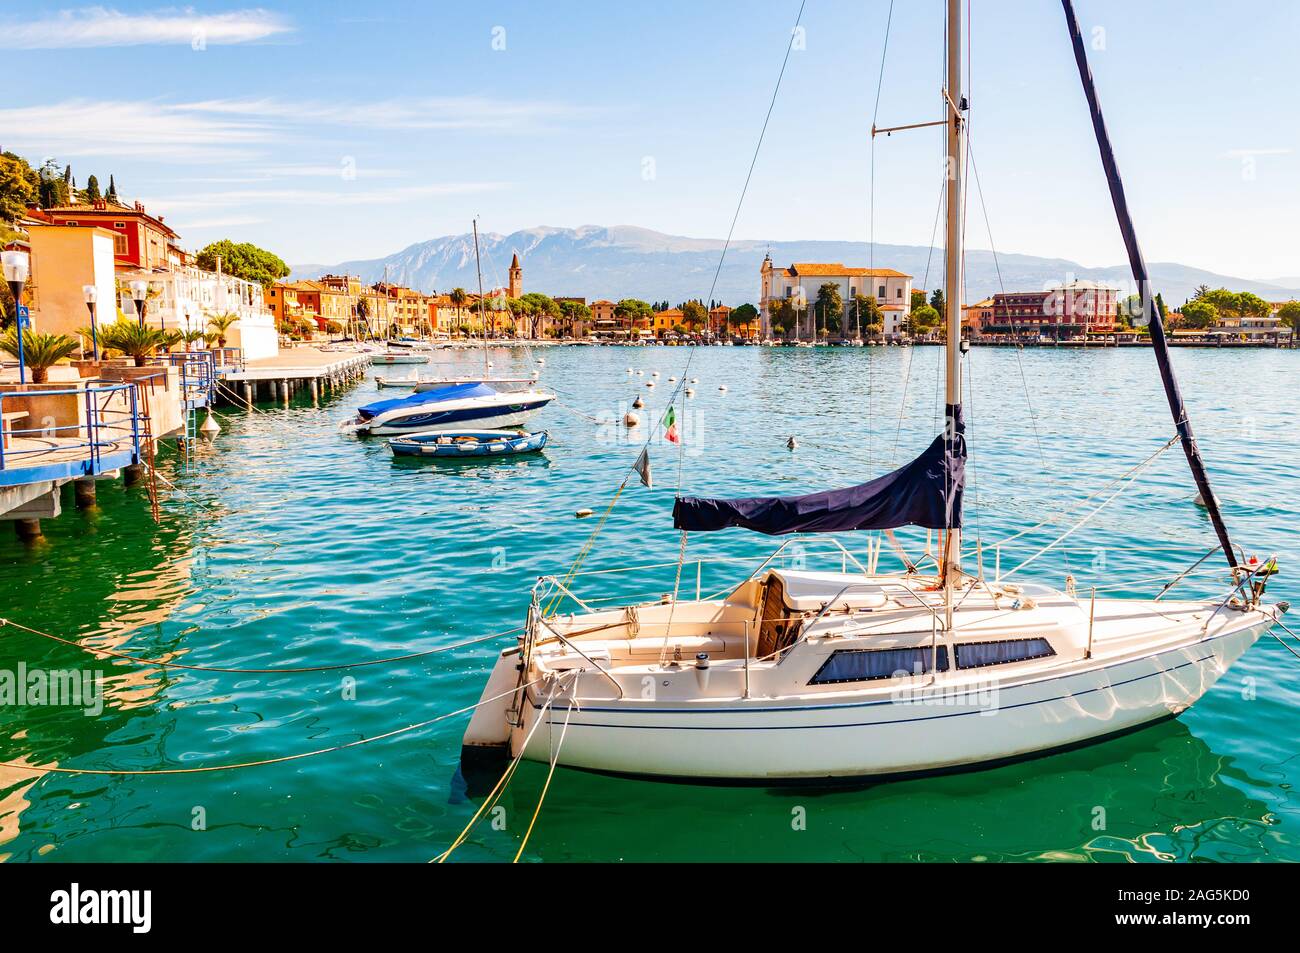 Toscolano Maderno, Lombardy, Italy - September 12, 2019: View on sailing yacht and boats parked on crystal clear blue water of amazing lake Garda and Stock Photo